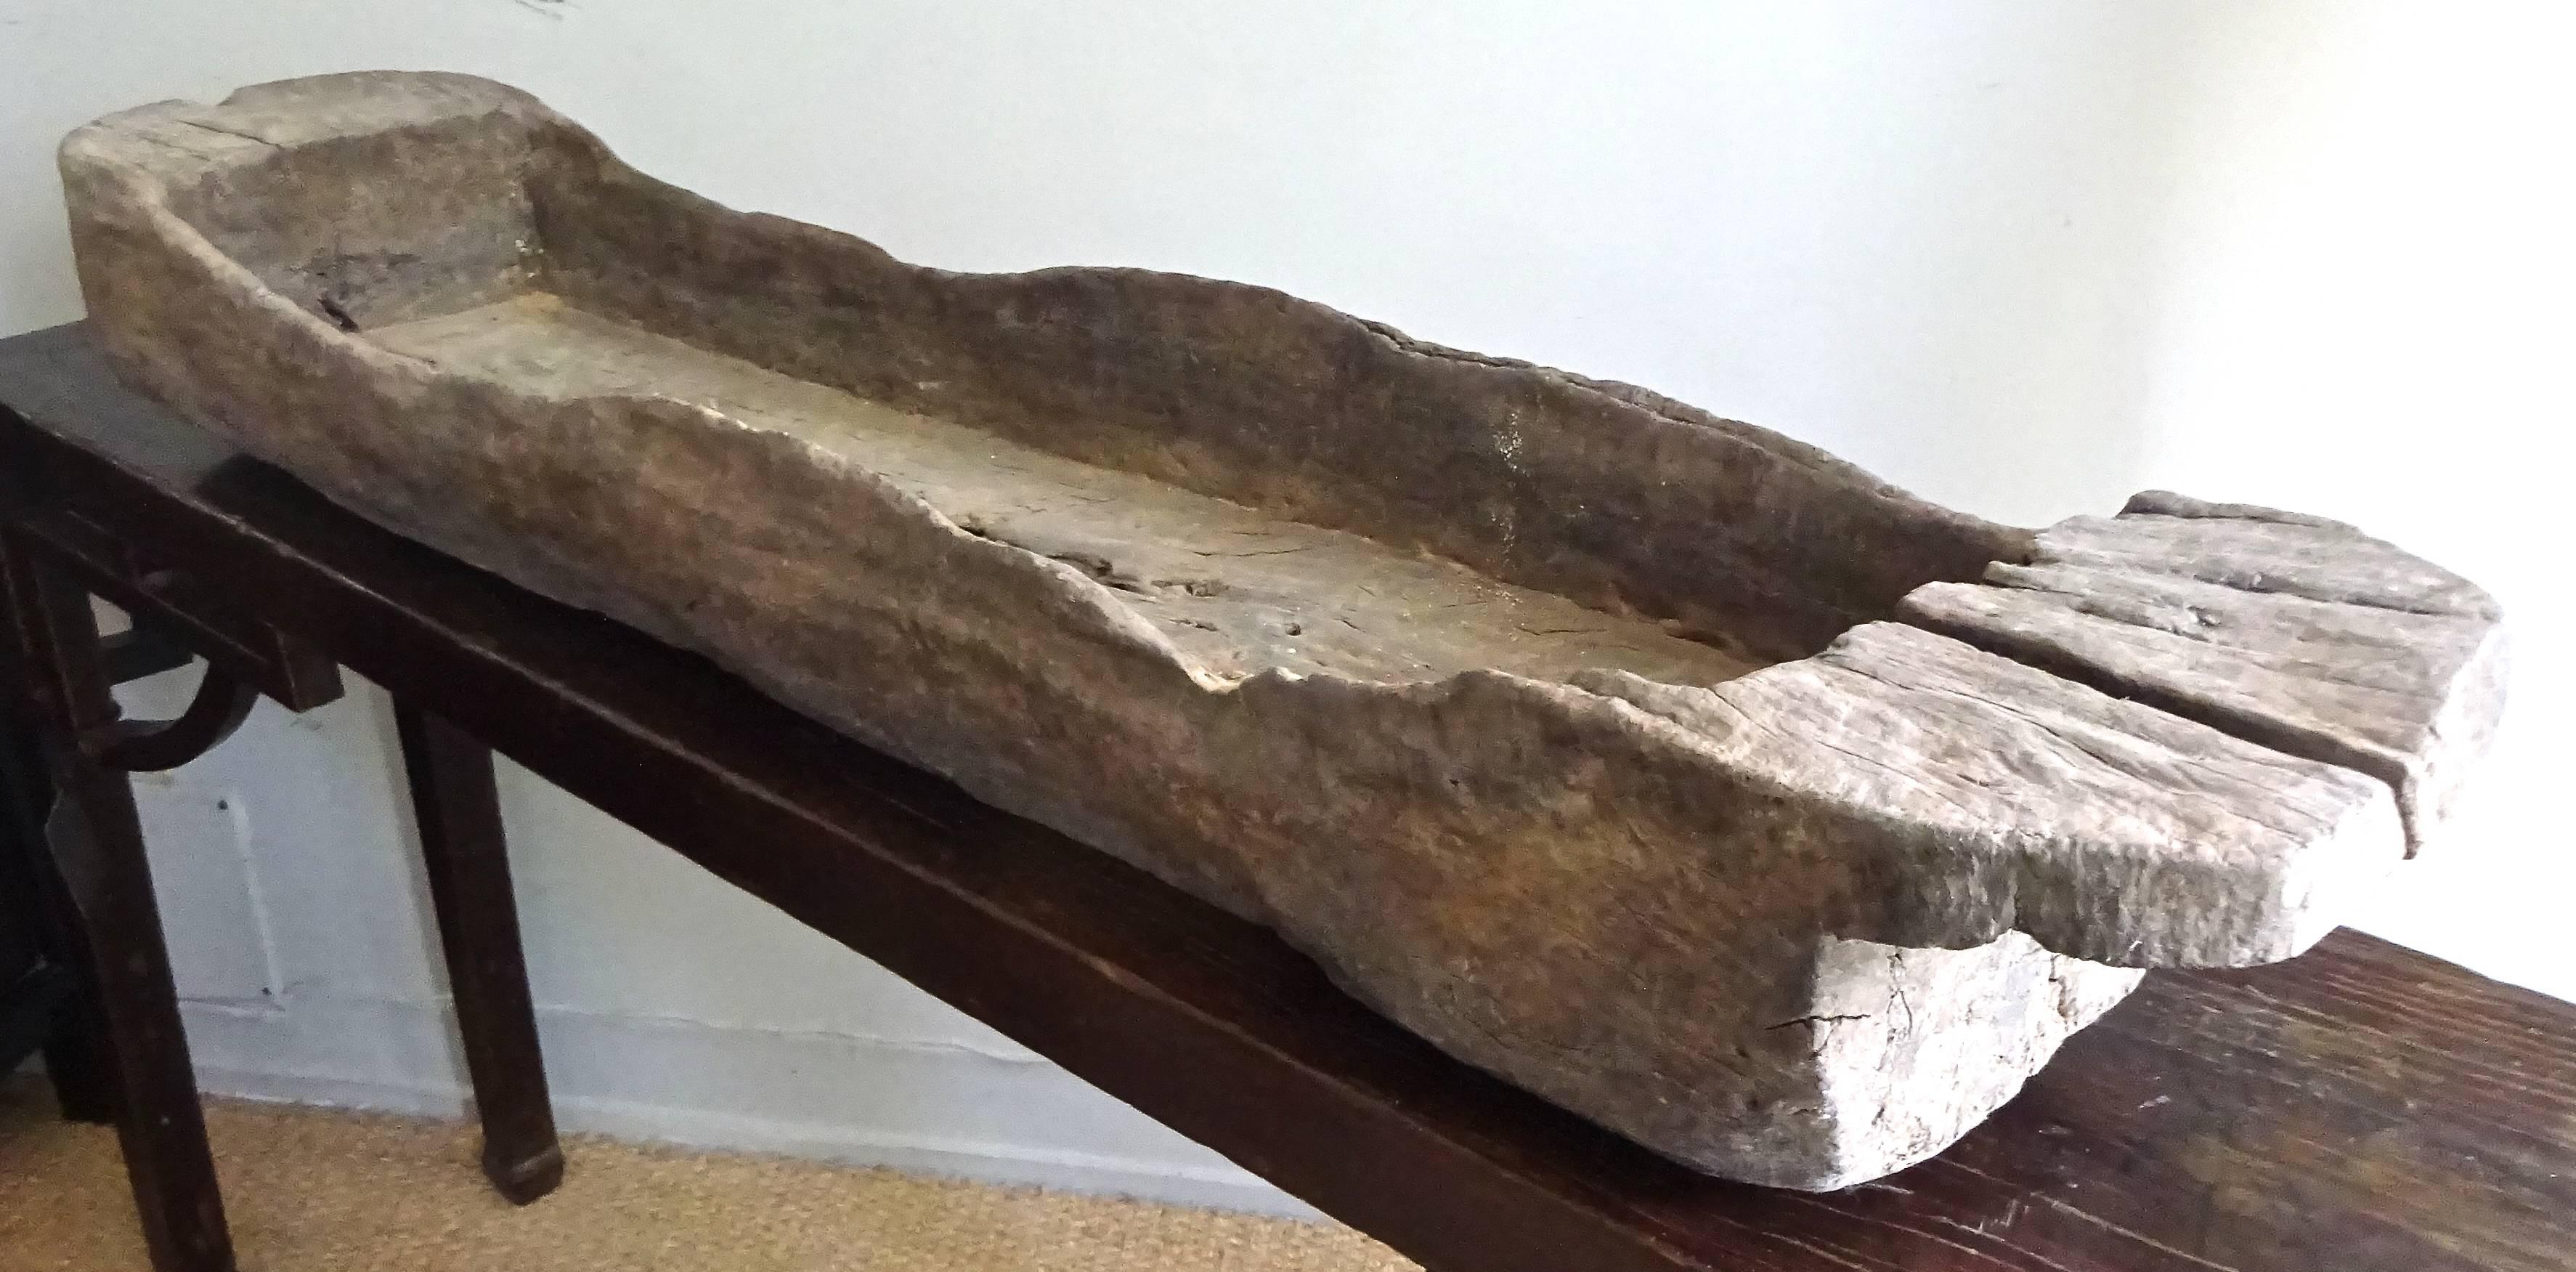 Hand hewn wooden trough cut from one piece of timber. Found in the Yuan Province in rural China.